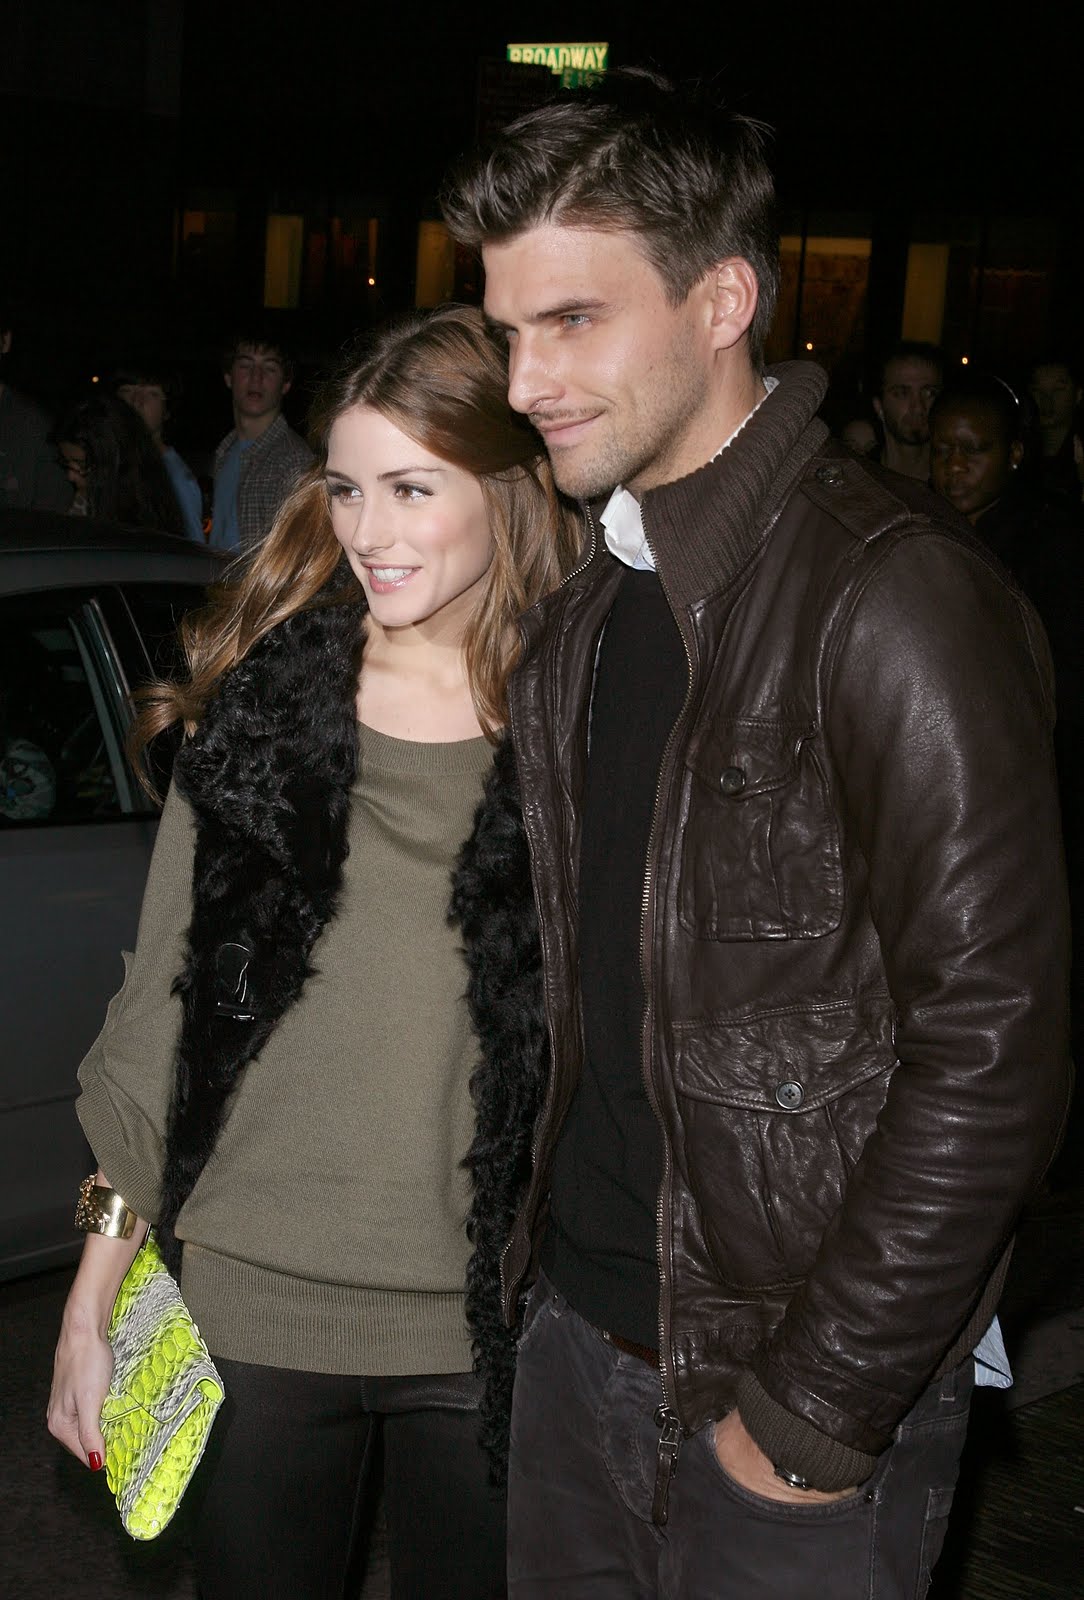 Olivia Palermo attends The Private Lives Of Pippa Lee screening after party